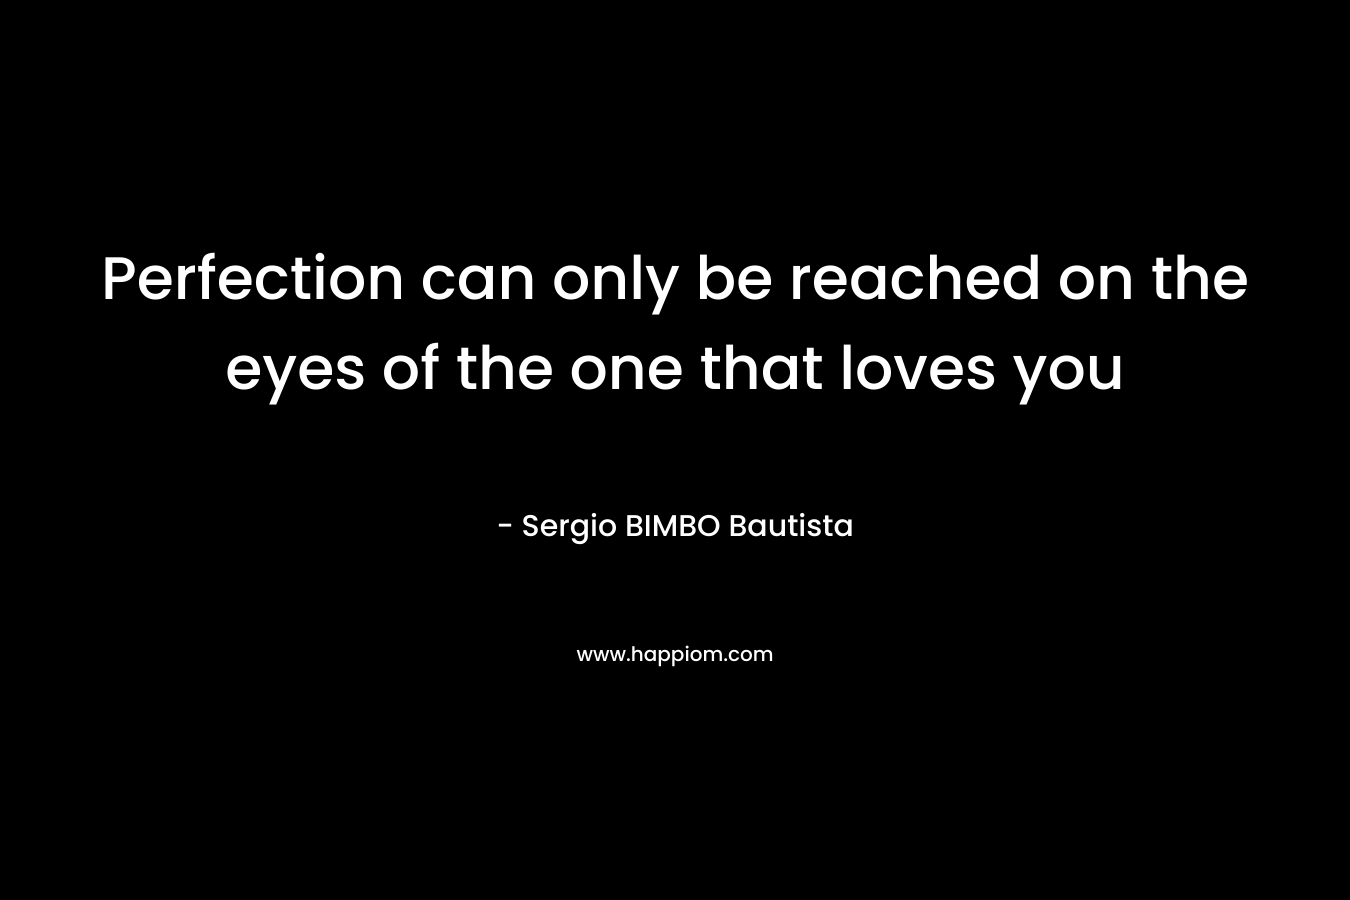 Perfection can only be reached on the eyes of the one that loves you – Sergio BIMBO Bautista